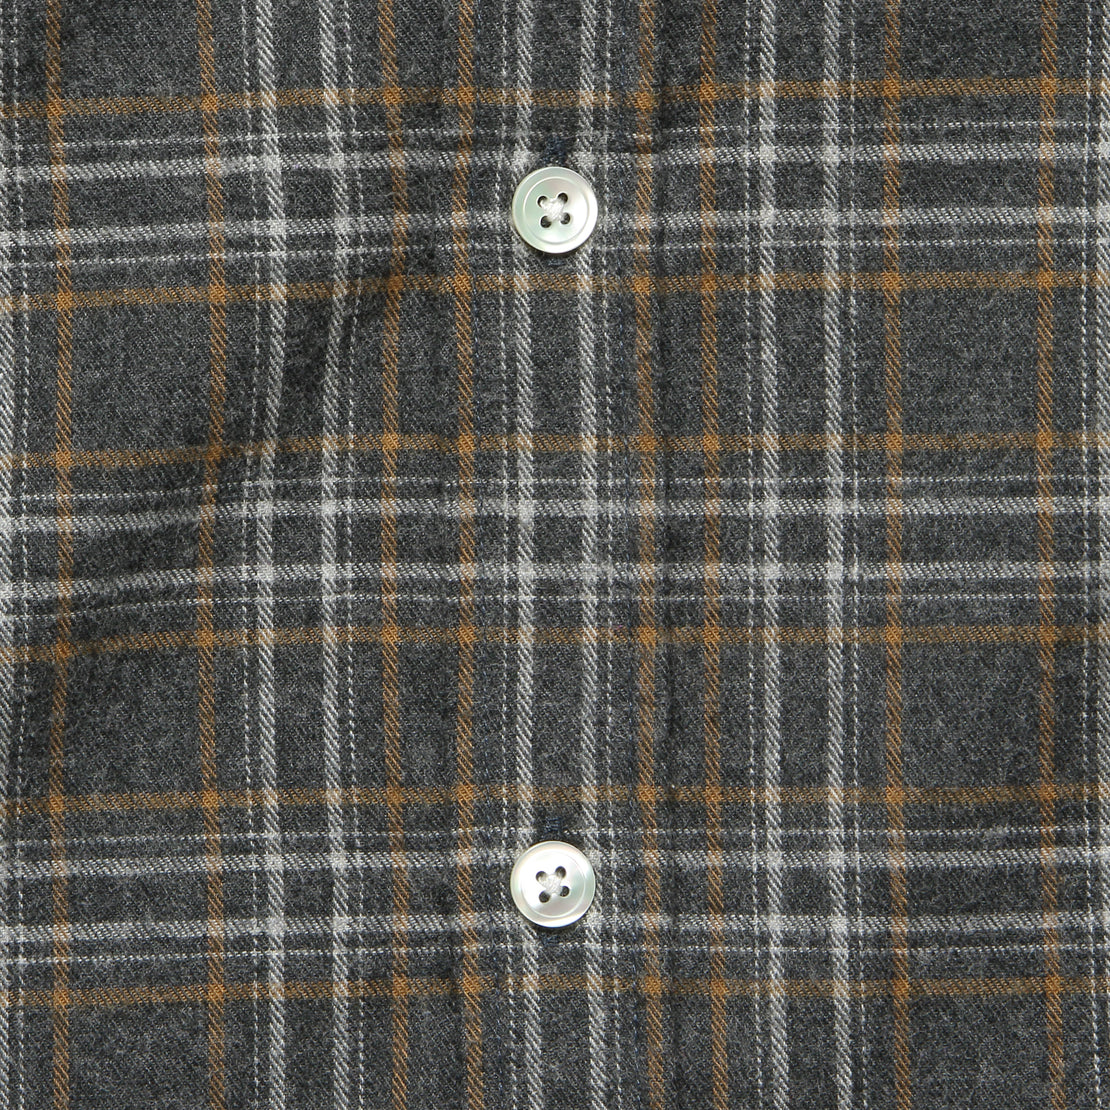 Mill Shirt - Grey/Brown - Portuguese Flannel - STAG Provisions - Tops - L/S Woven - Plaid